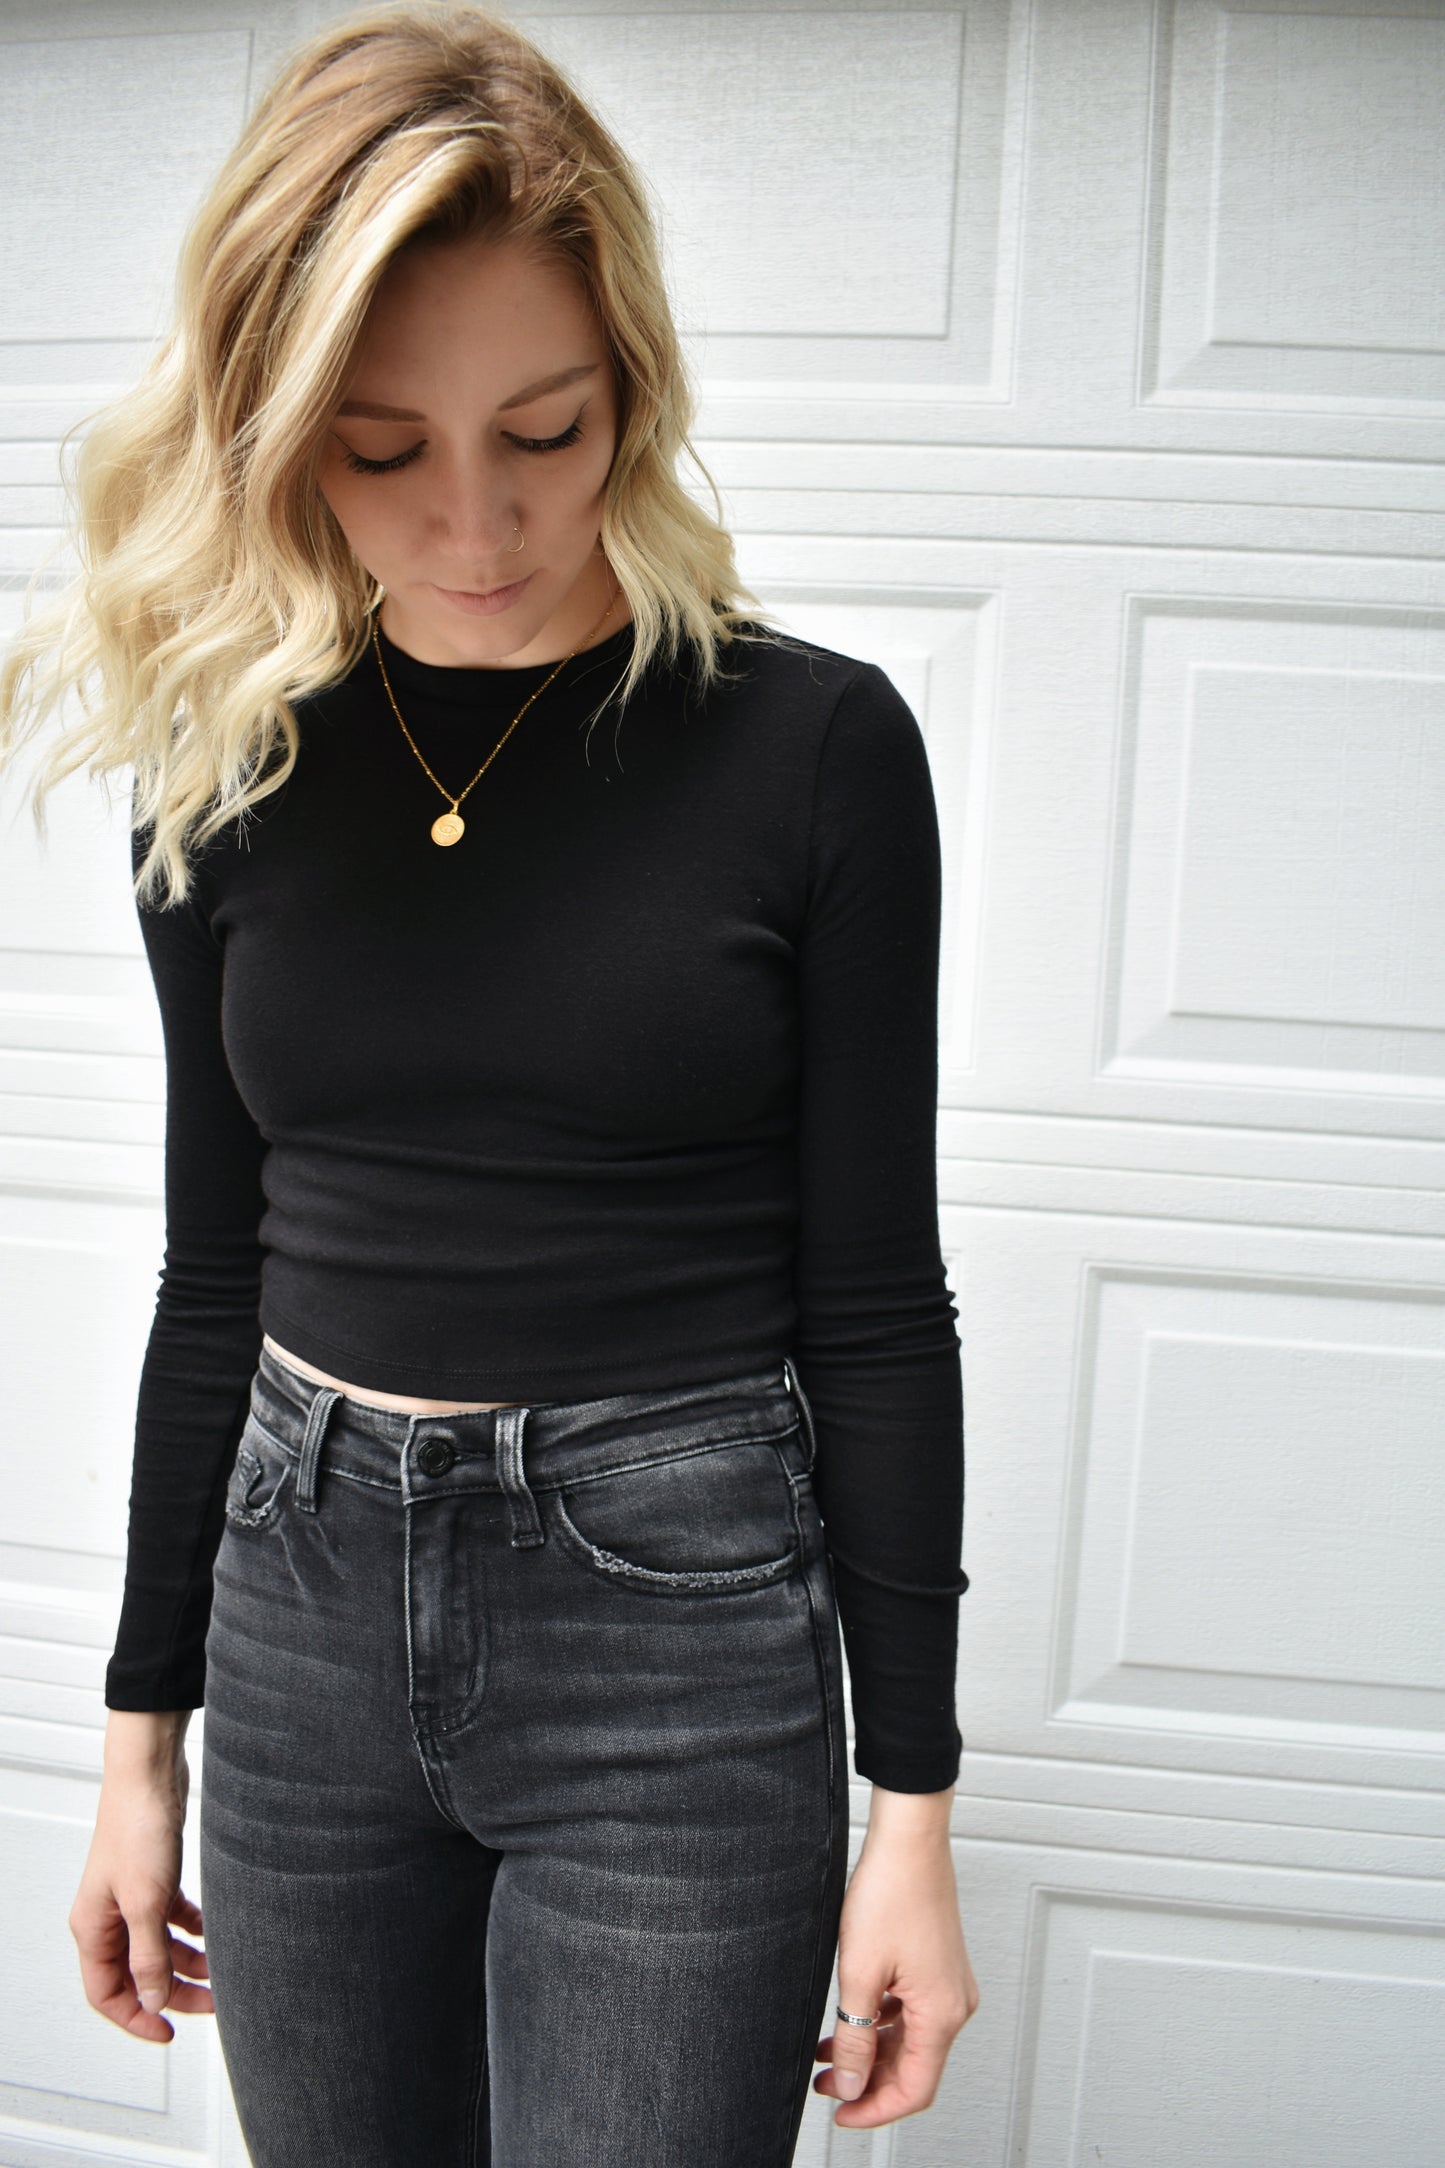 black long steeve essential fitted cropped top with round neck. Stretchy, comfortable, the brand is Hyfve.